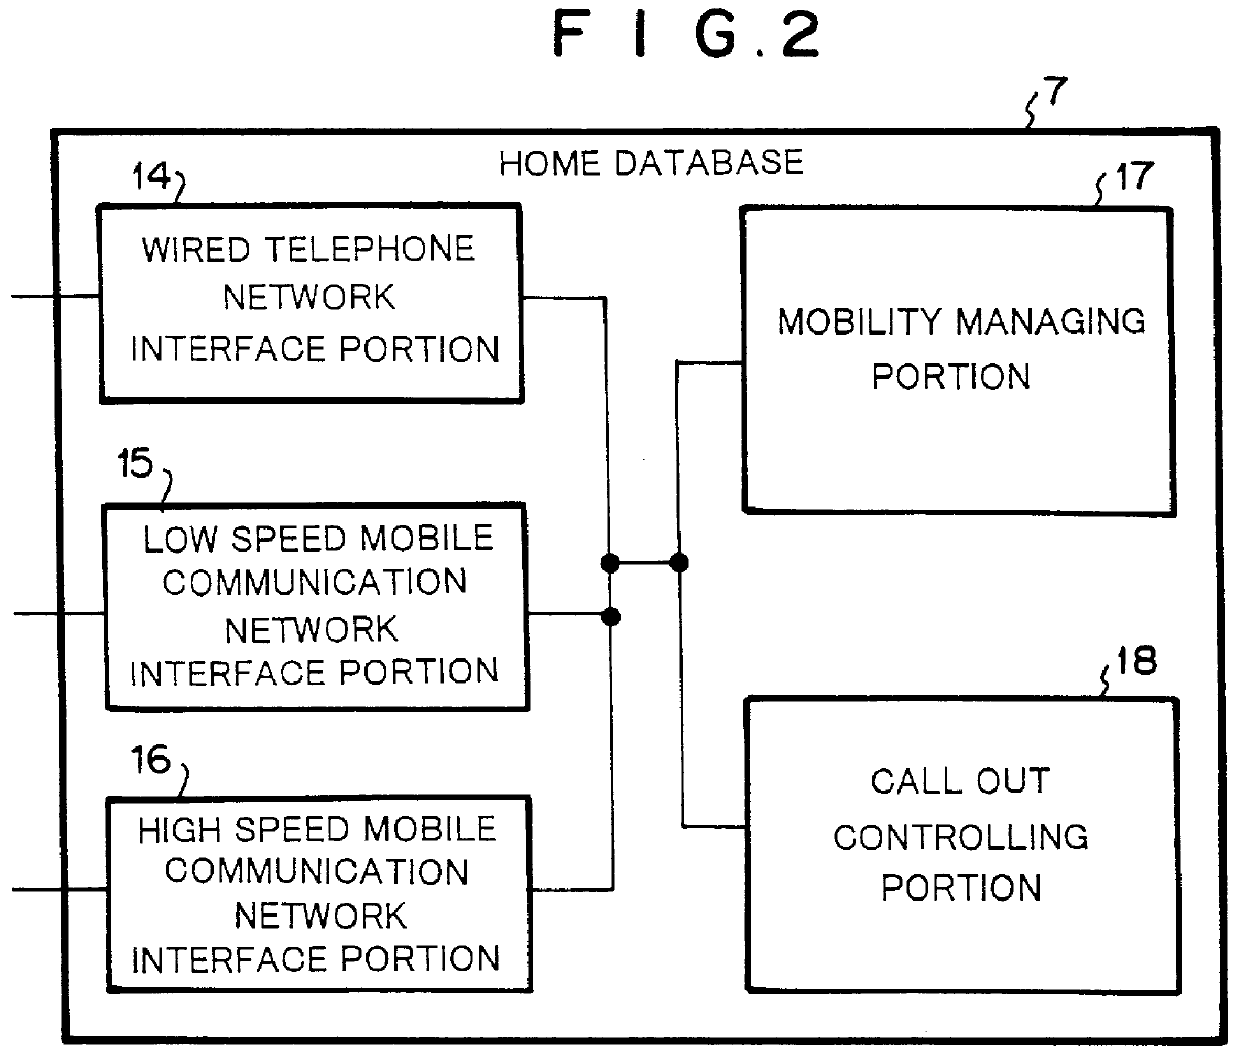 Mobility management system in personal communication system